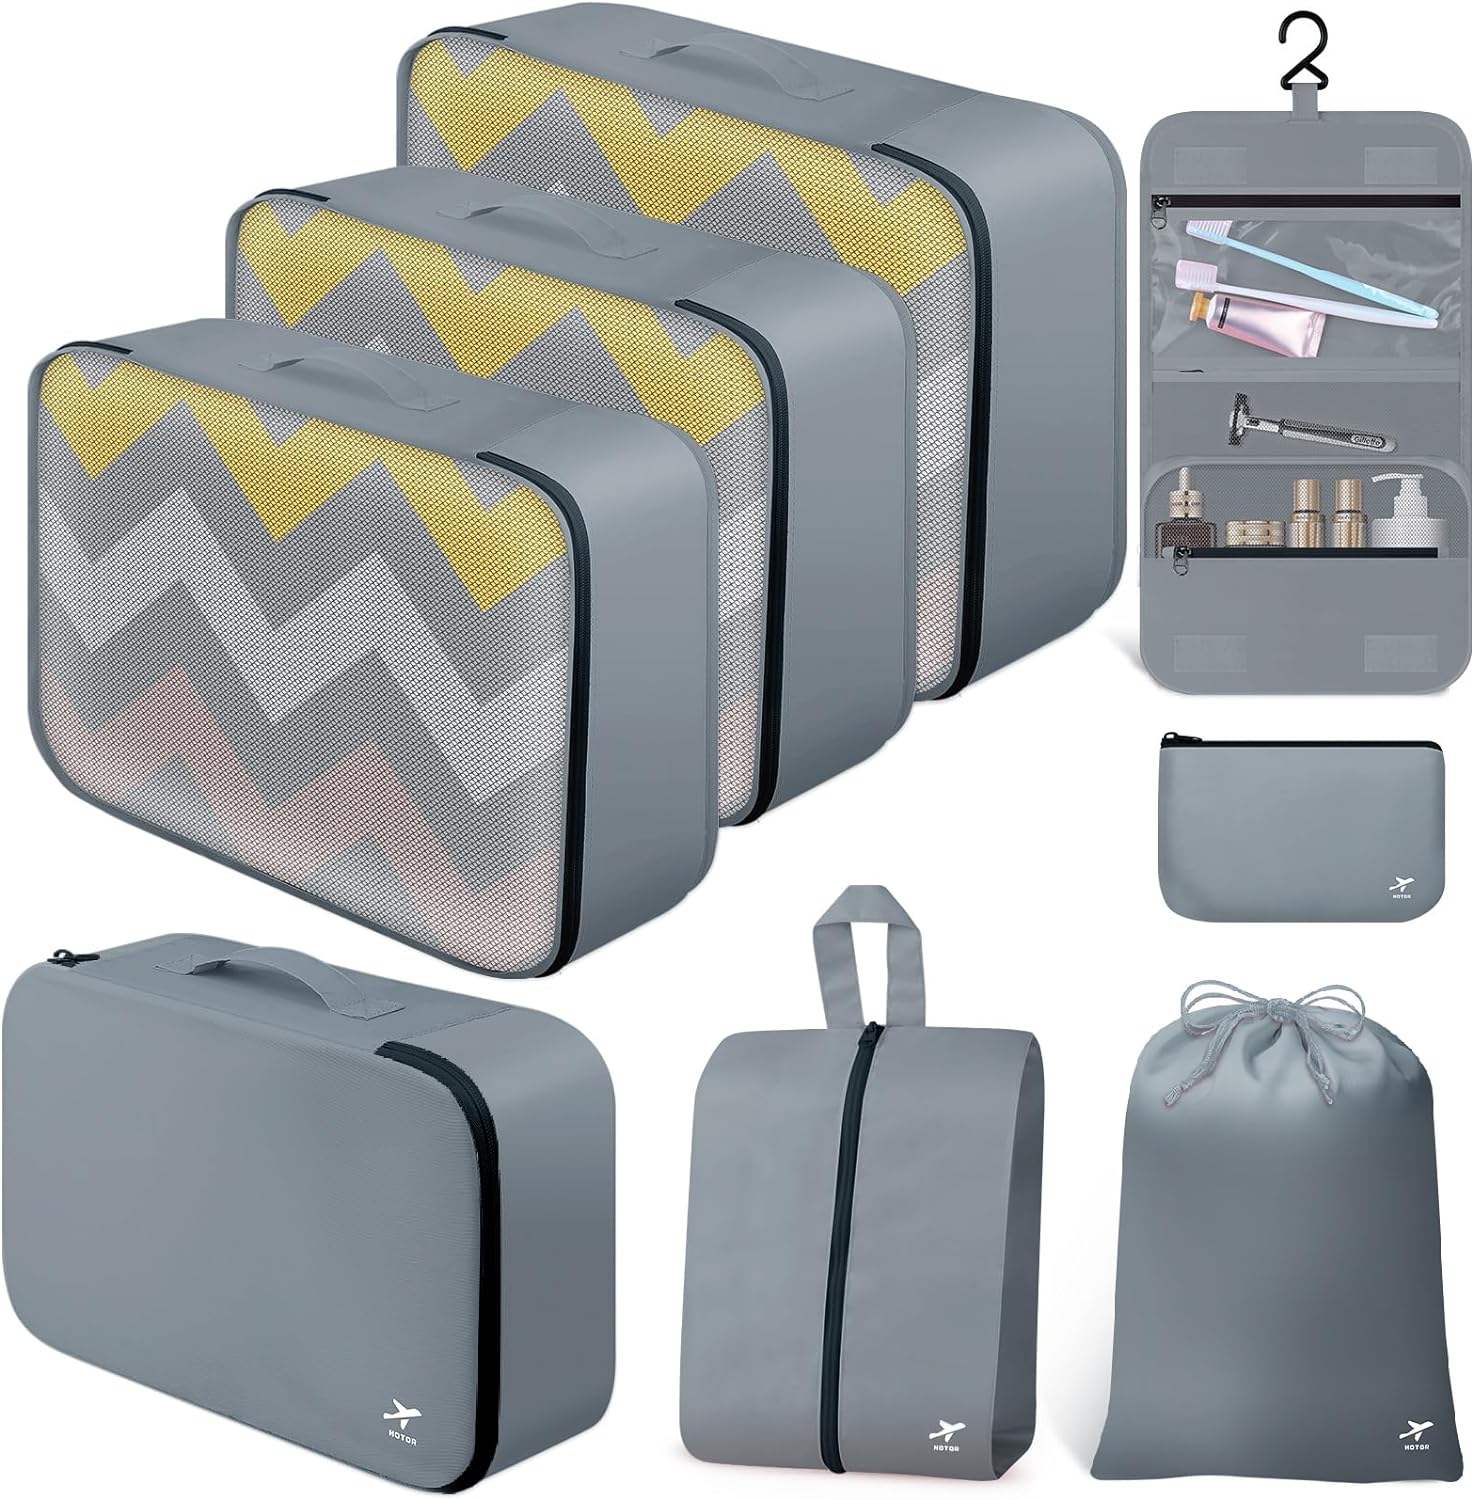 HOTOR Packing Cubes for Suitcases - 8 Pieces, Light Packing Cubes for Travel, Premium Suitcase Organizer Bags Set, Space-Saving Luggage Organizers for Suitcase, Water-Resistant Travel Essentials, Grey